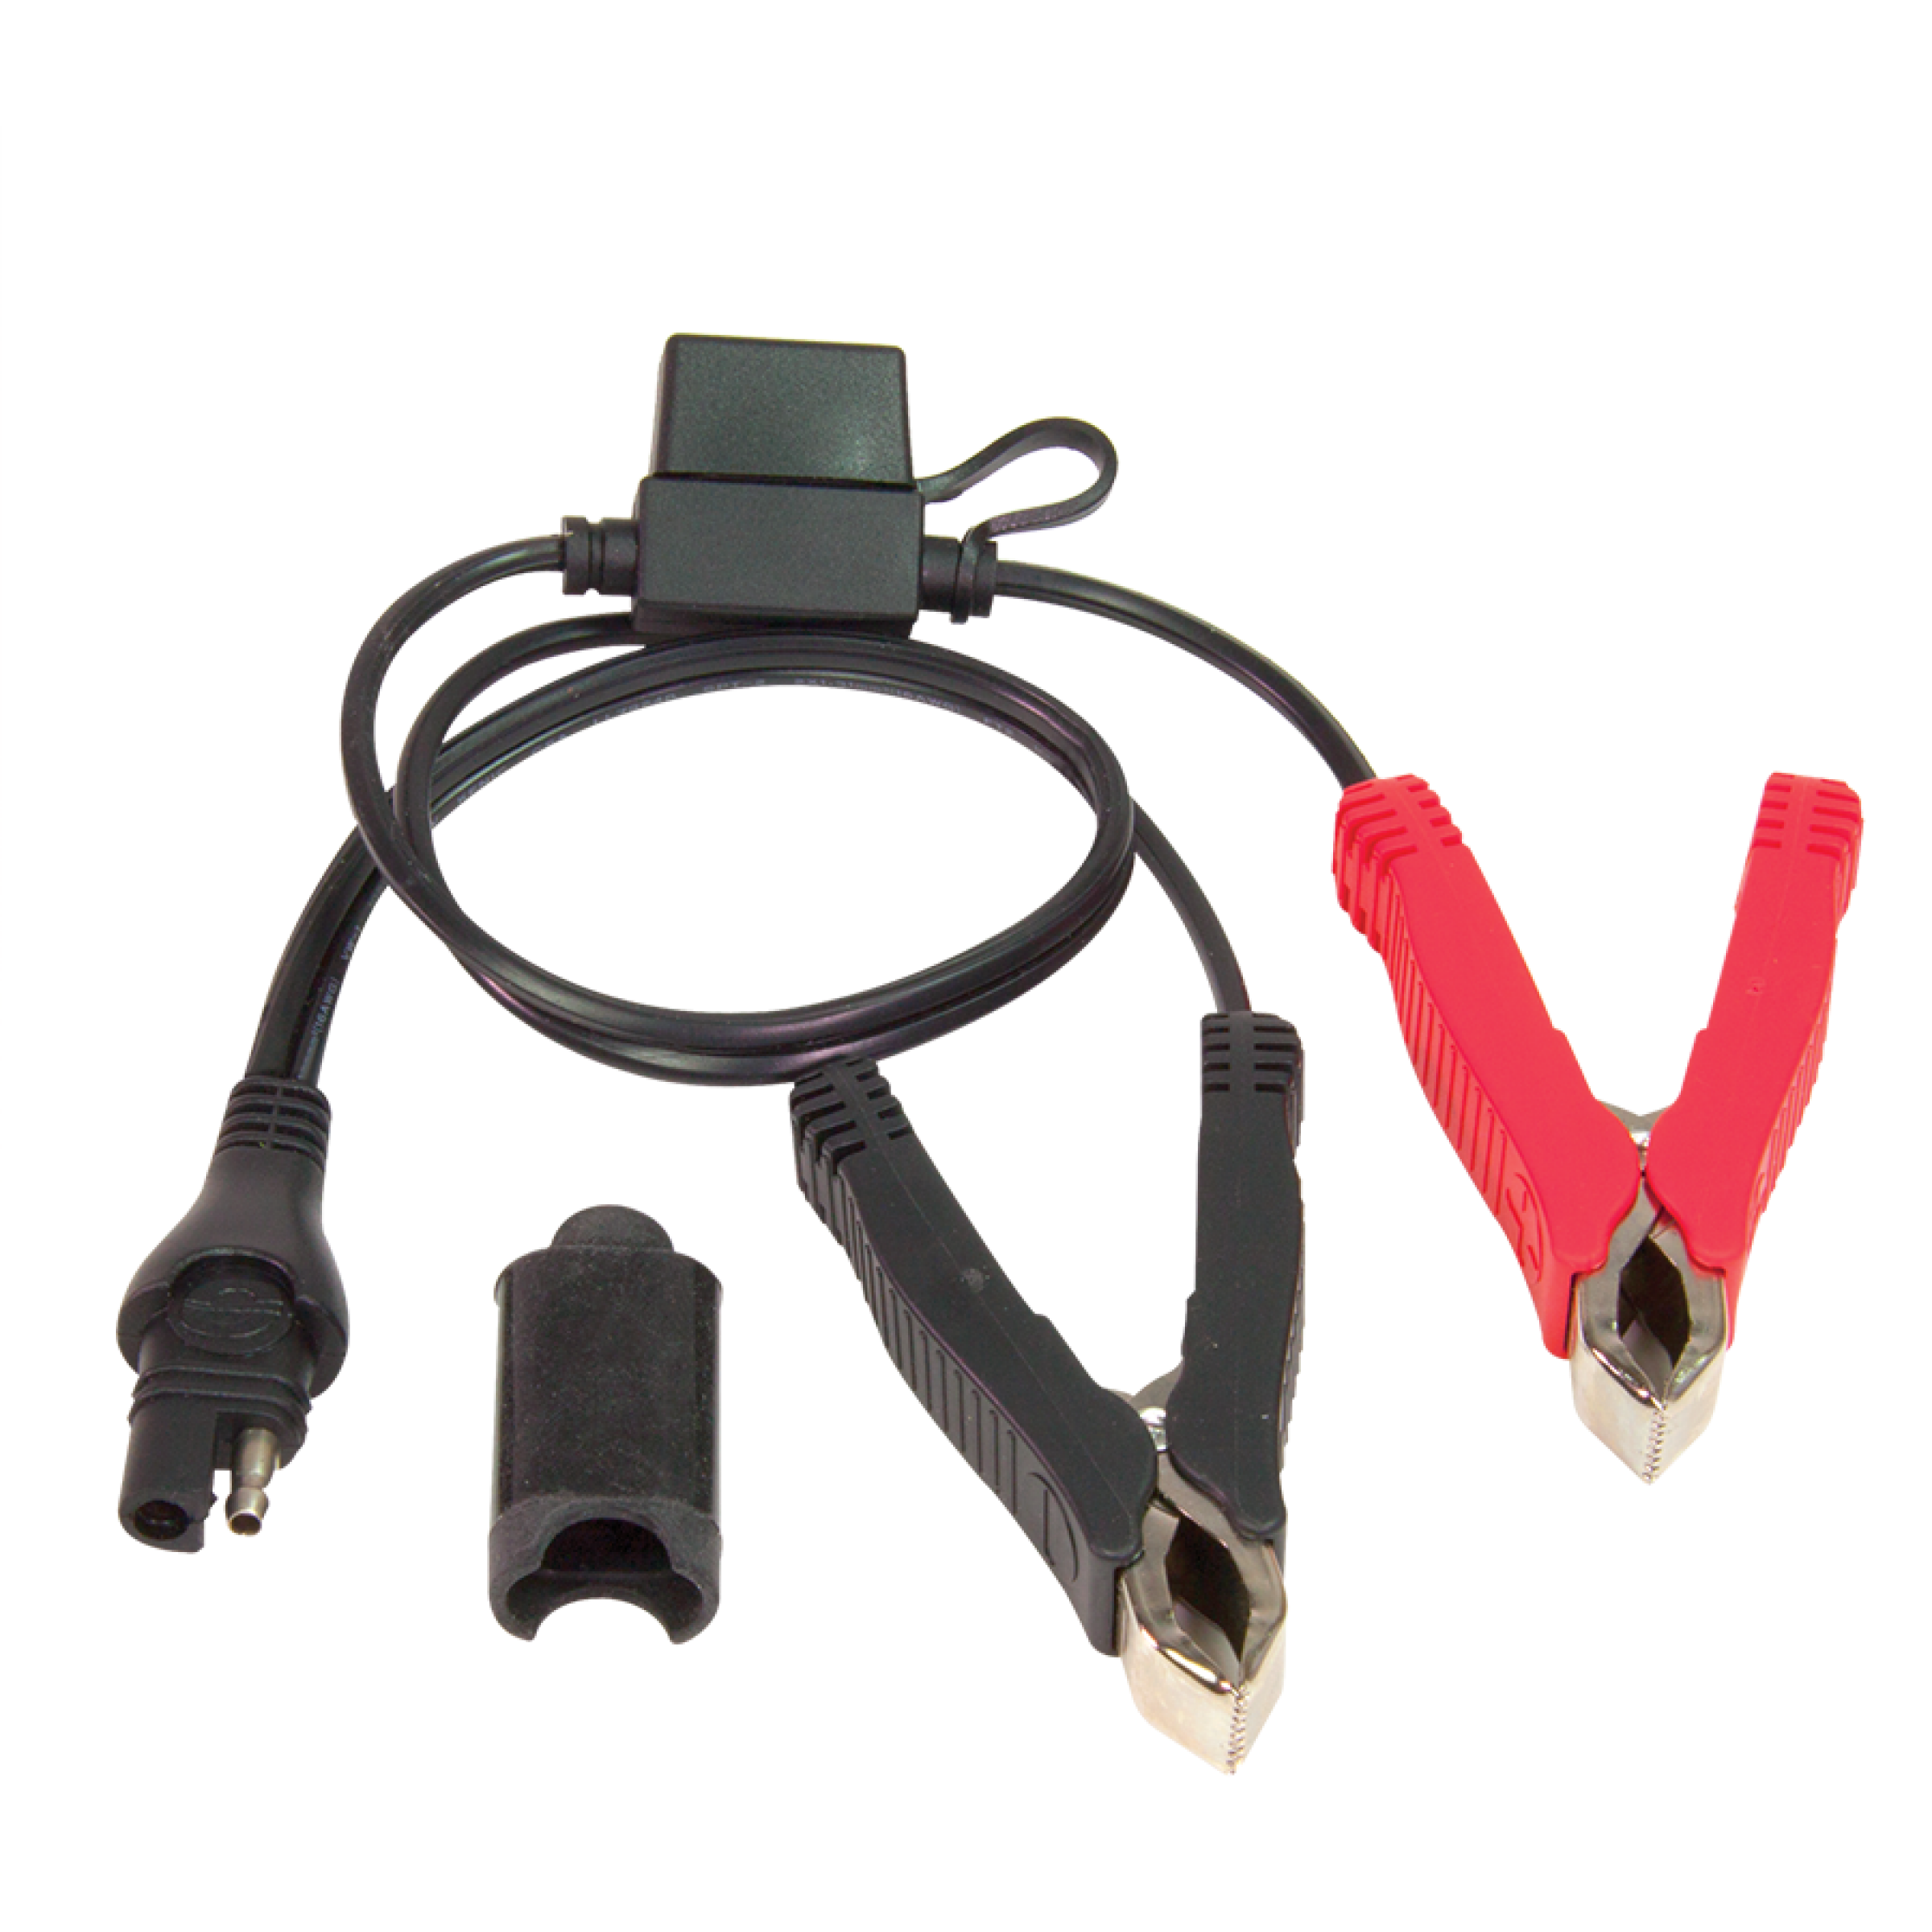 OptiMate CABLE O-14 - Battery clips (fused)